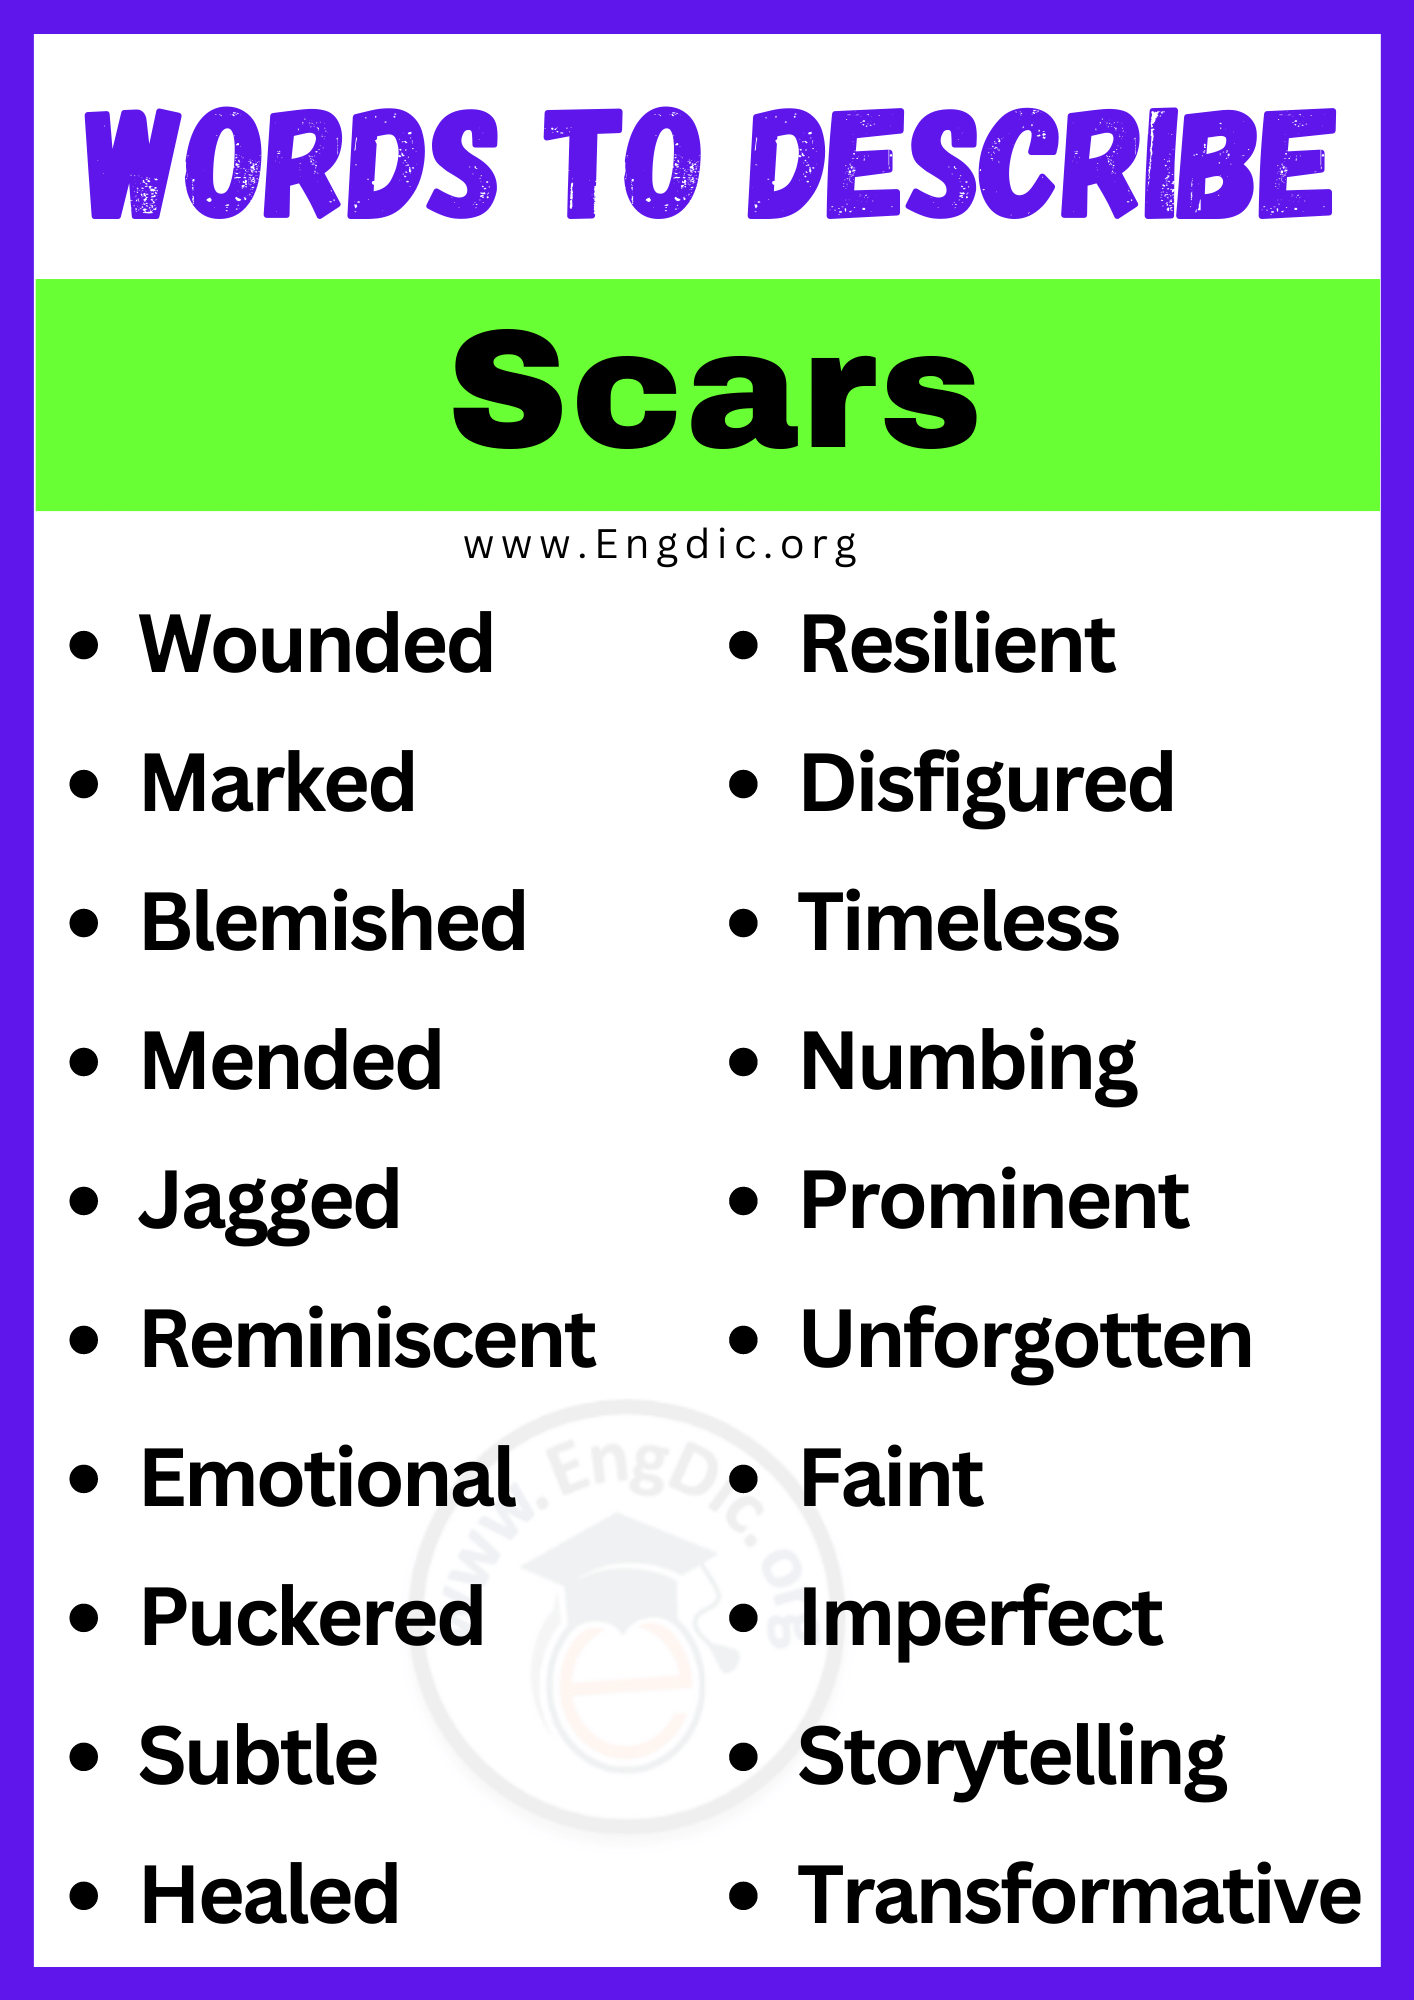 Words to Describe Scars